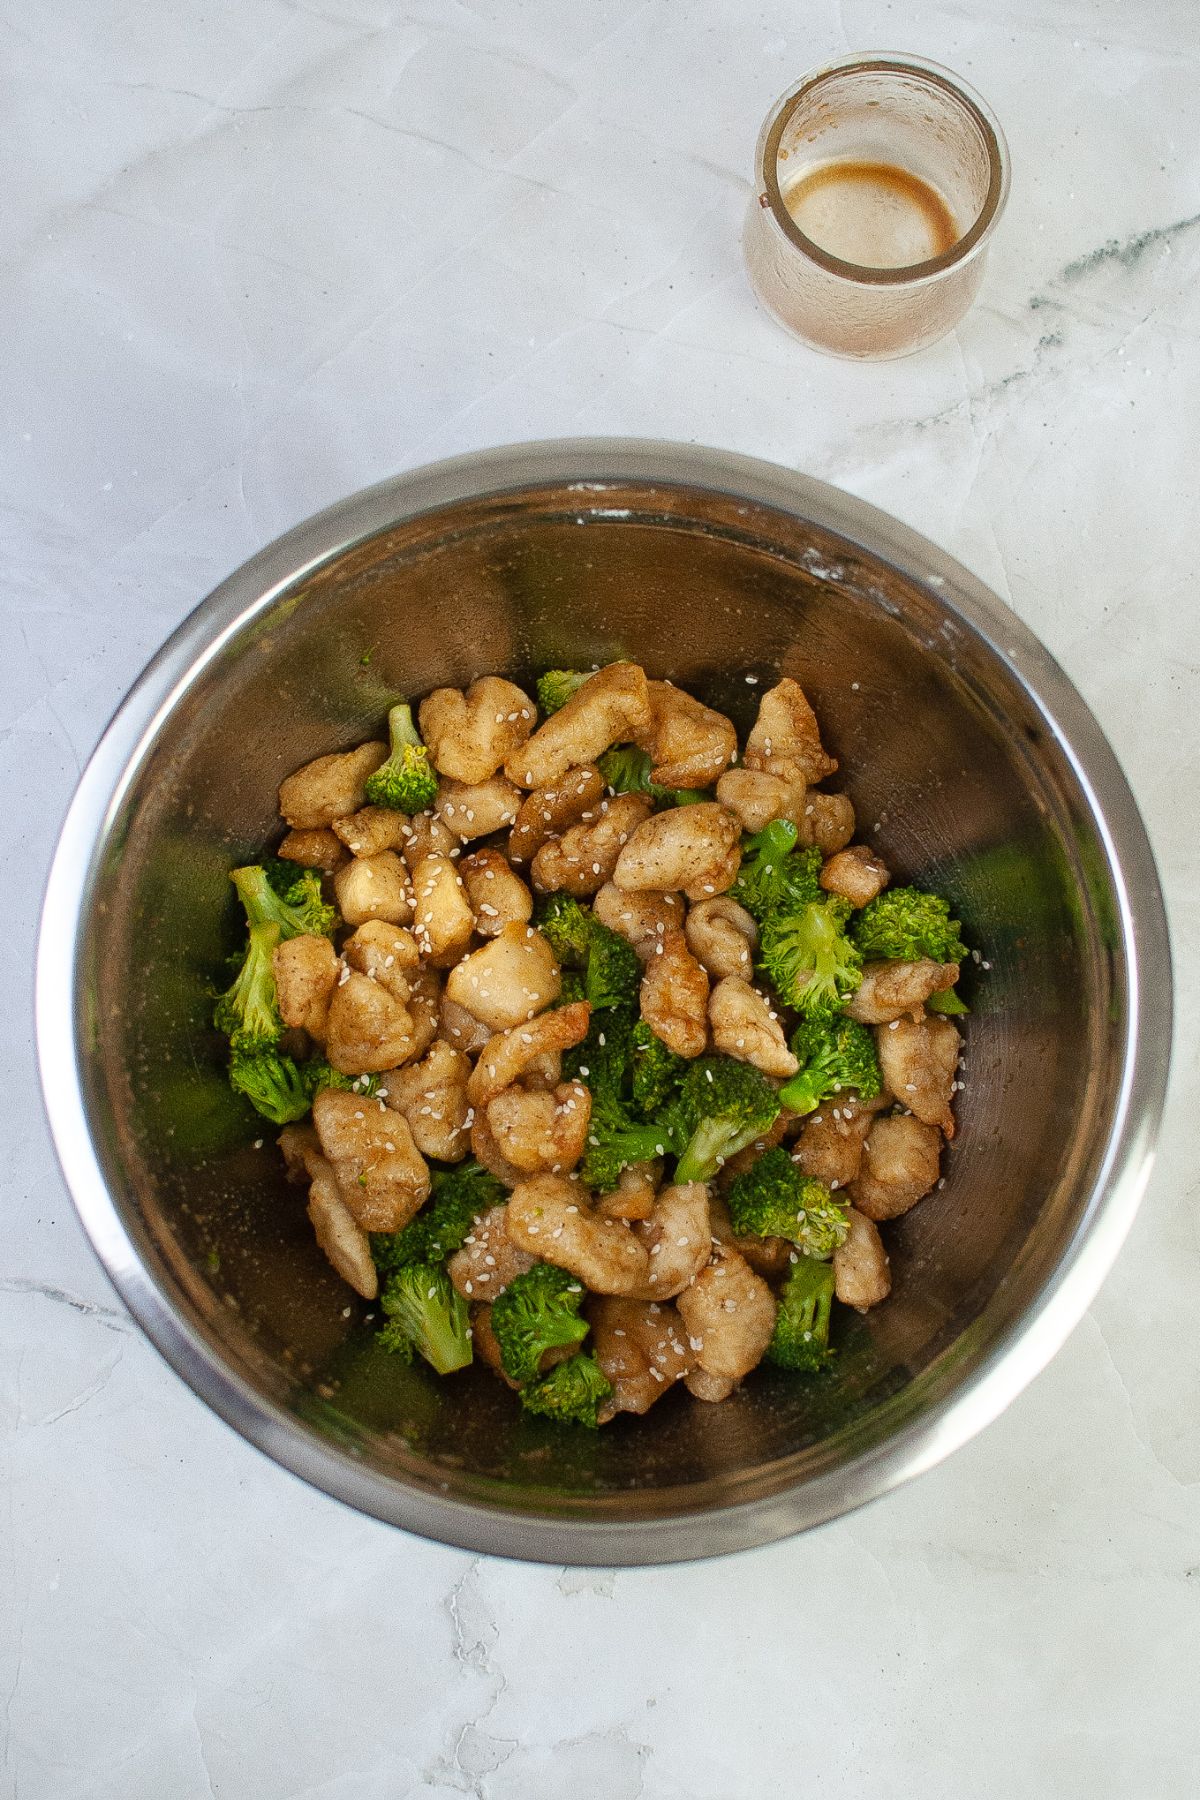 cooked chicken and broccoli being coated in sauce